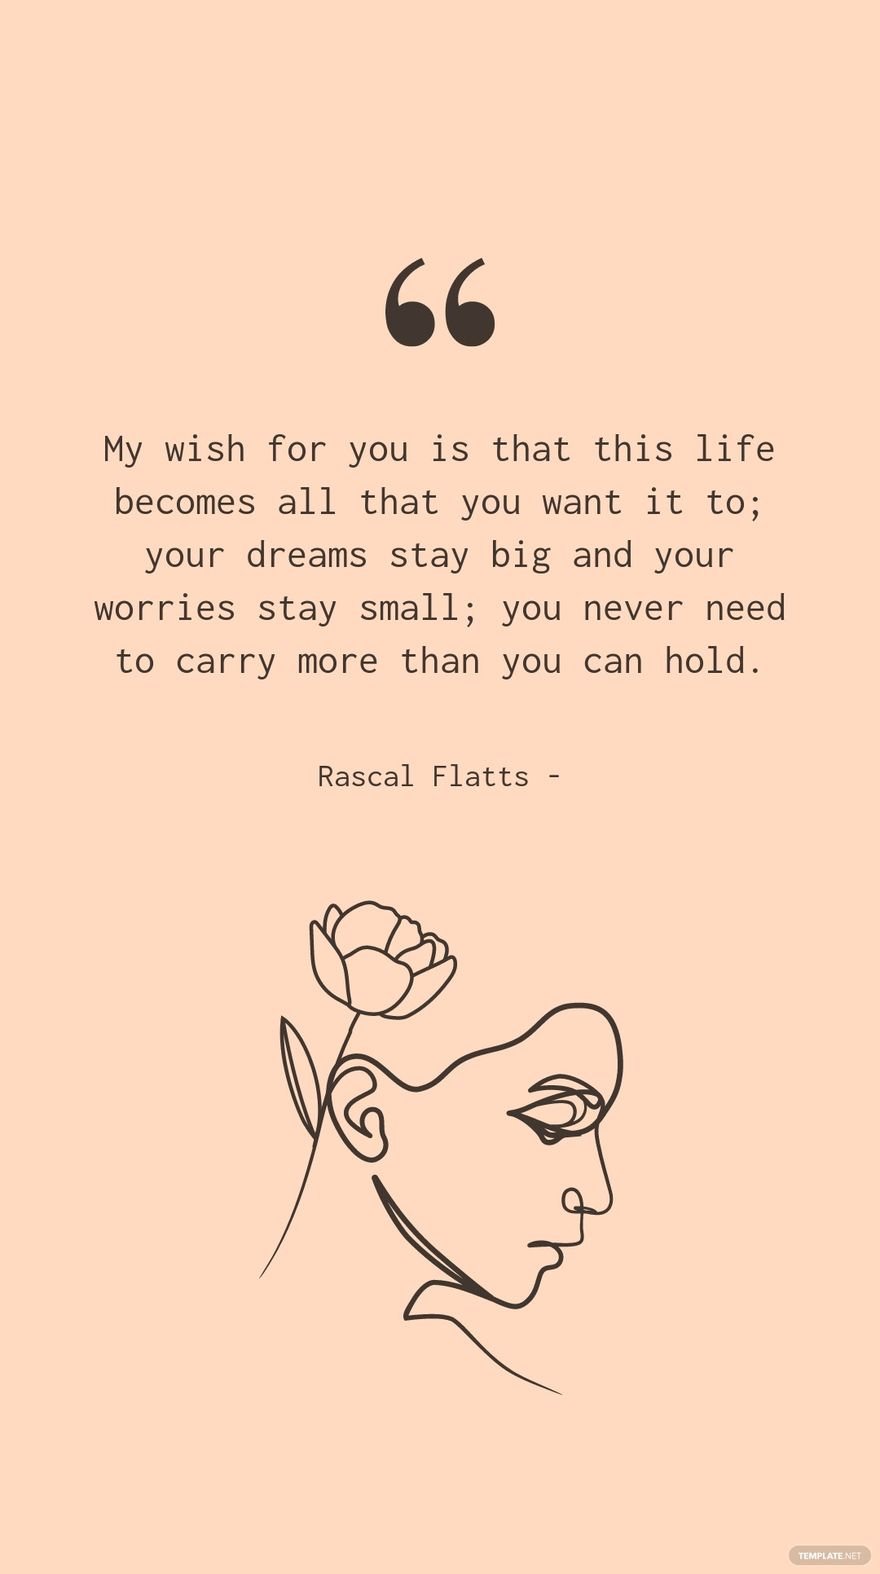 Rascal Flatts - My wish for you is that this life becomes all that you want it to; your dreams stay big and your worries stay small; you never need to carry more than you can hold.